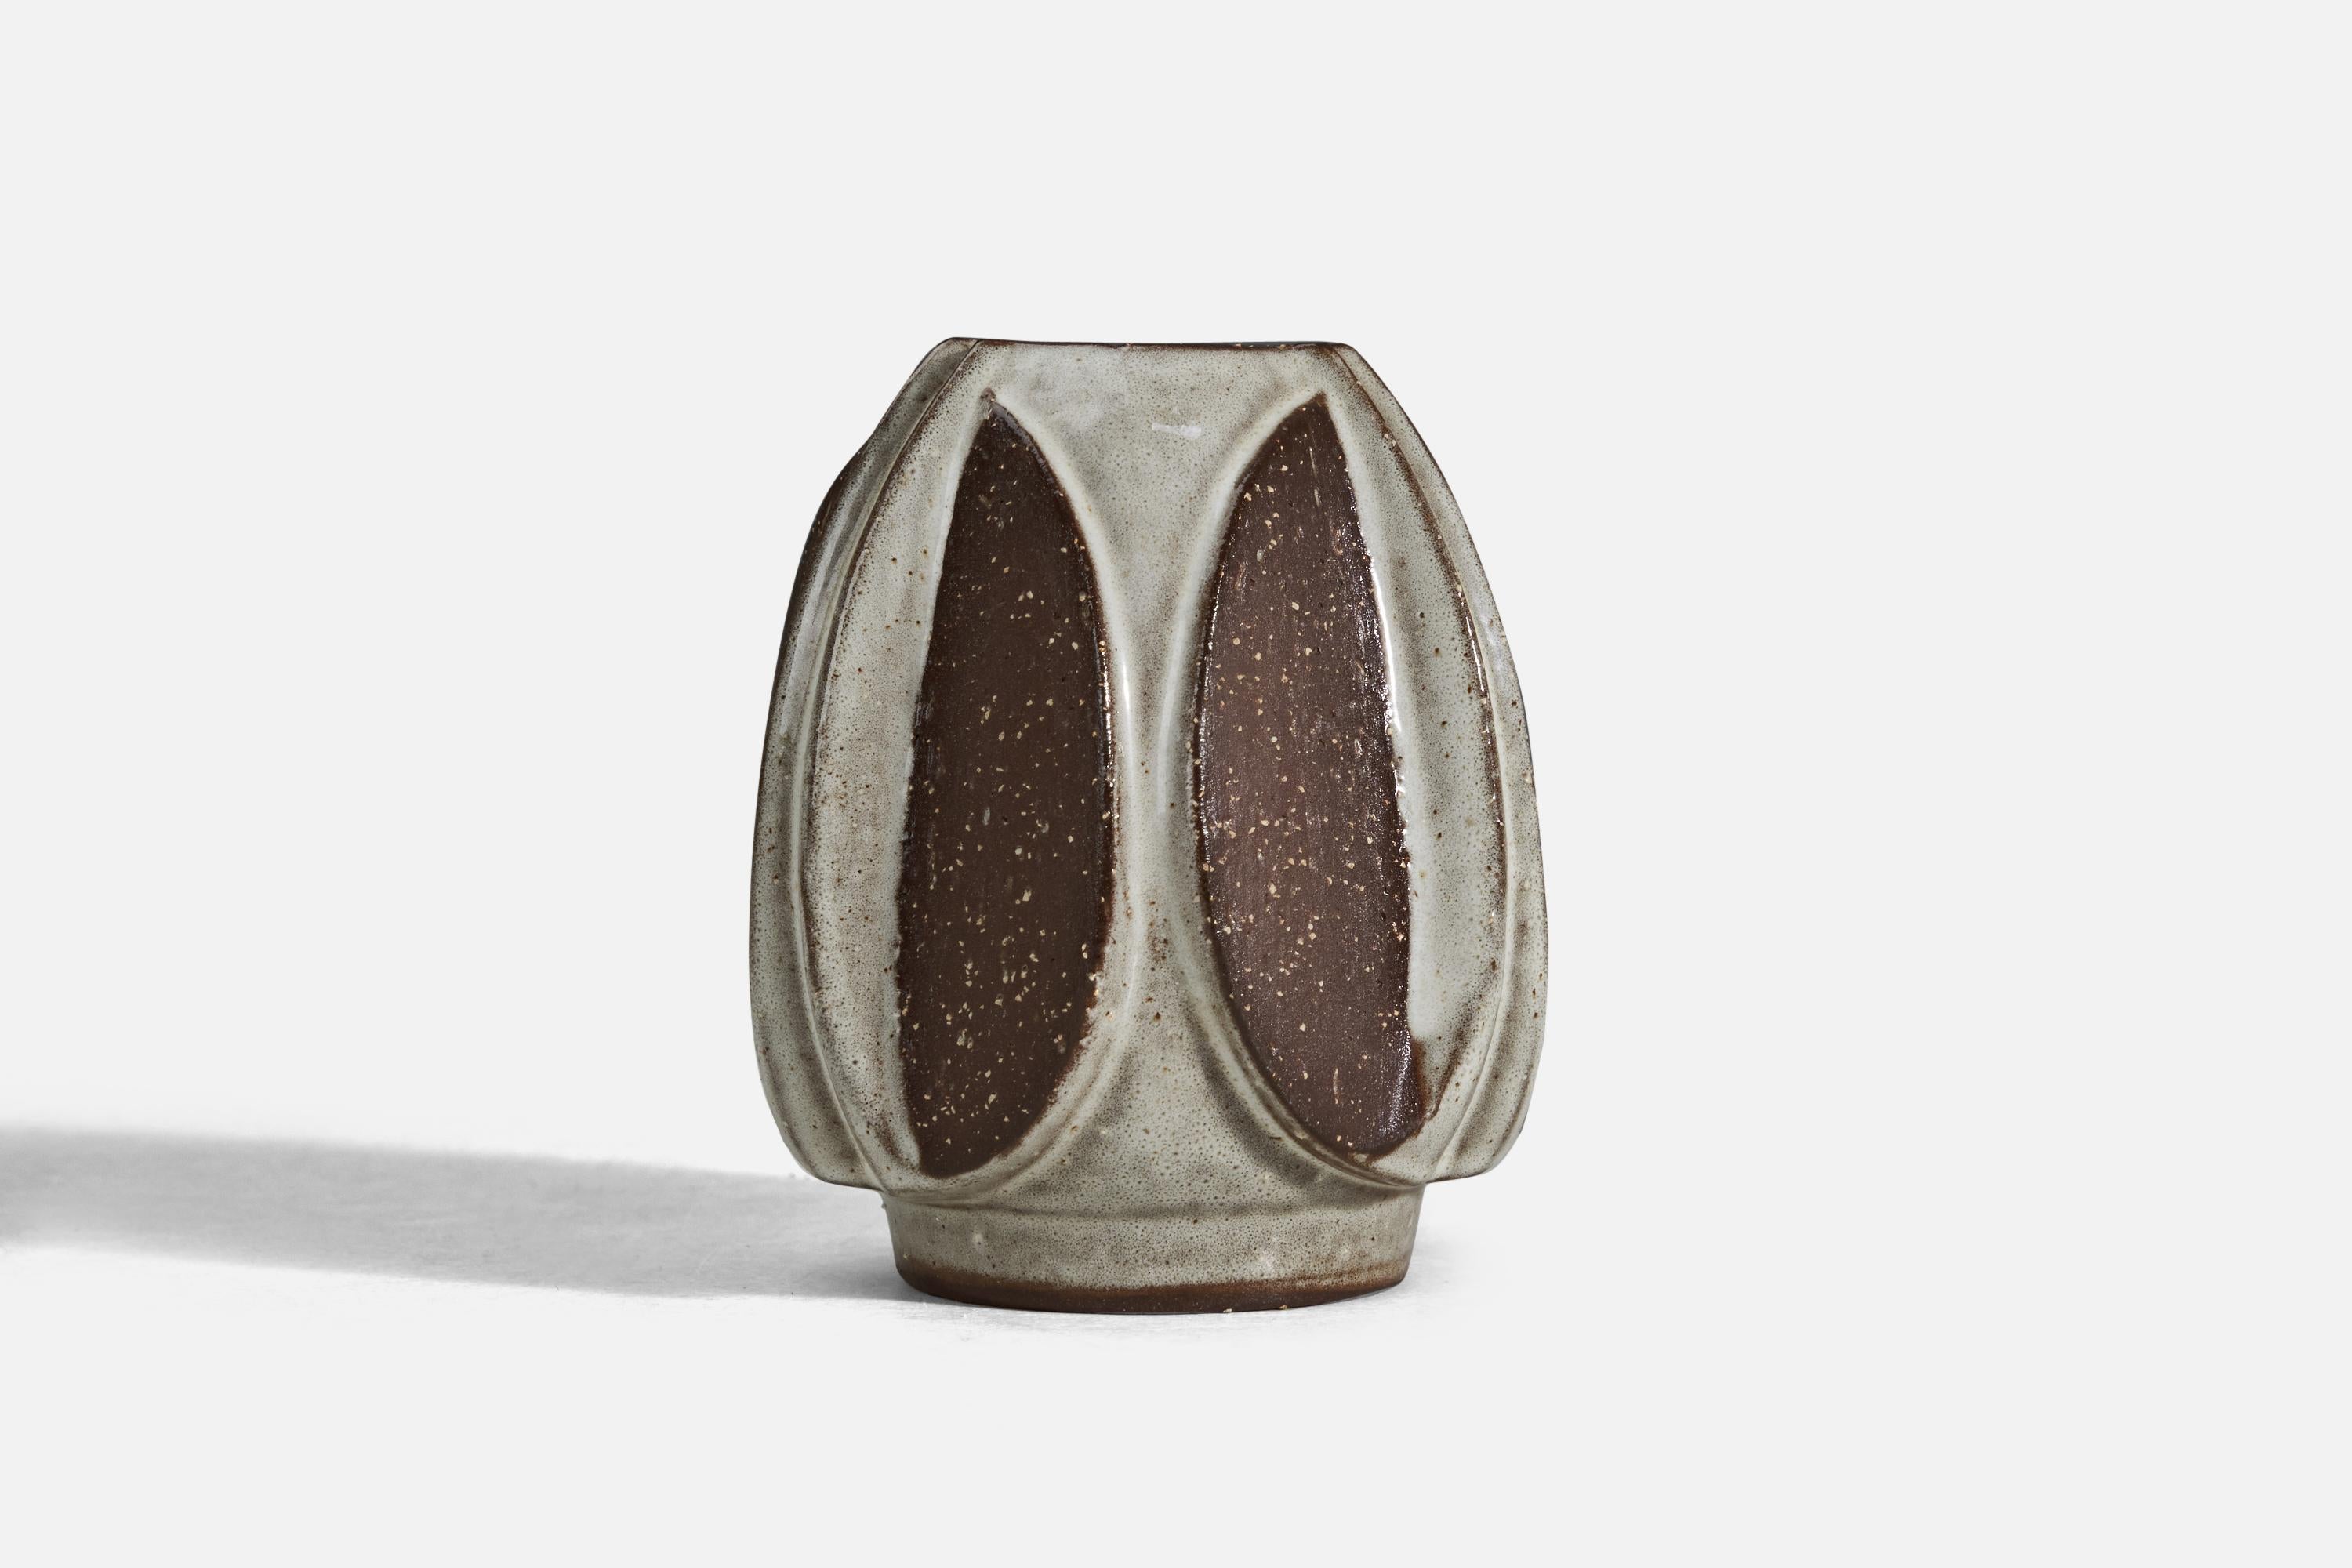 A brown and white glazed stoneware vase designed by Marianne Starck and produced by Michael Andersen, Denmark, 1960s.